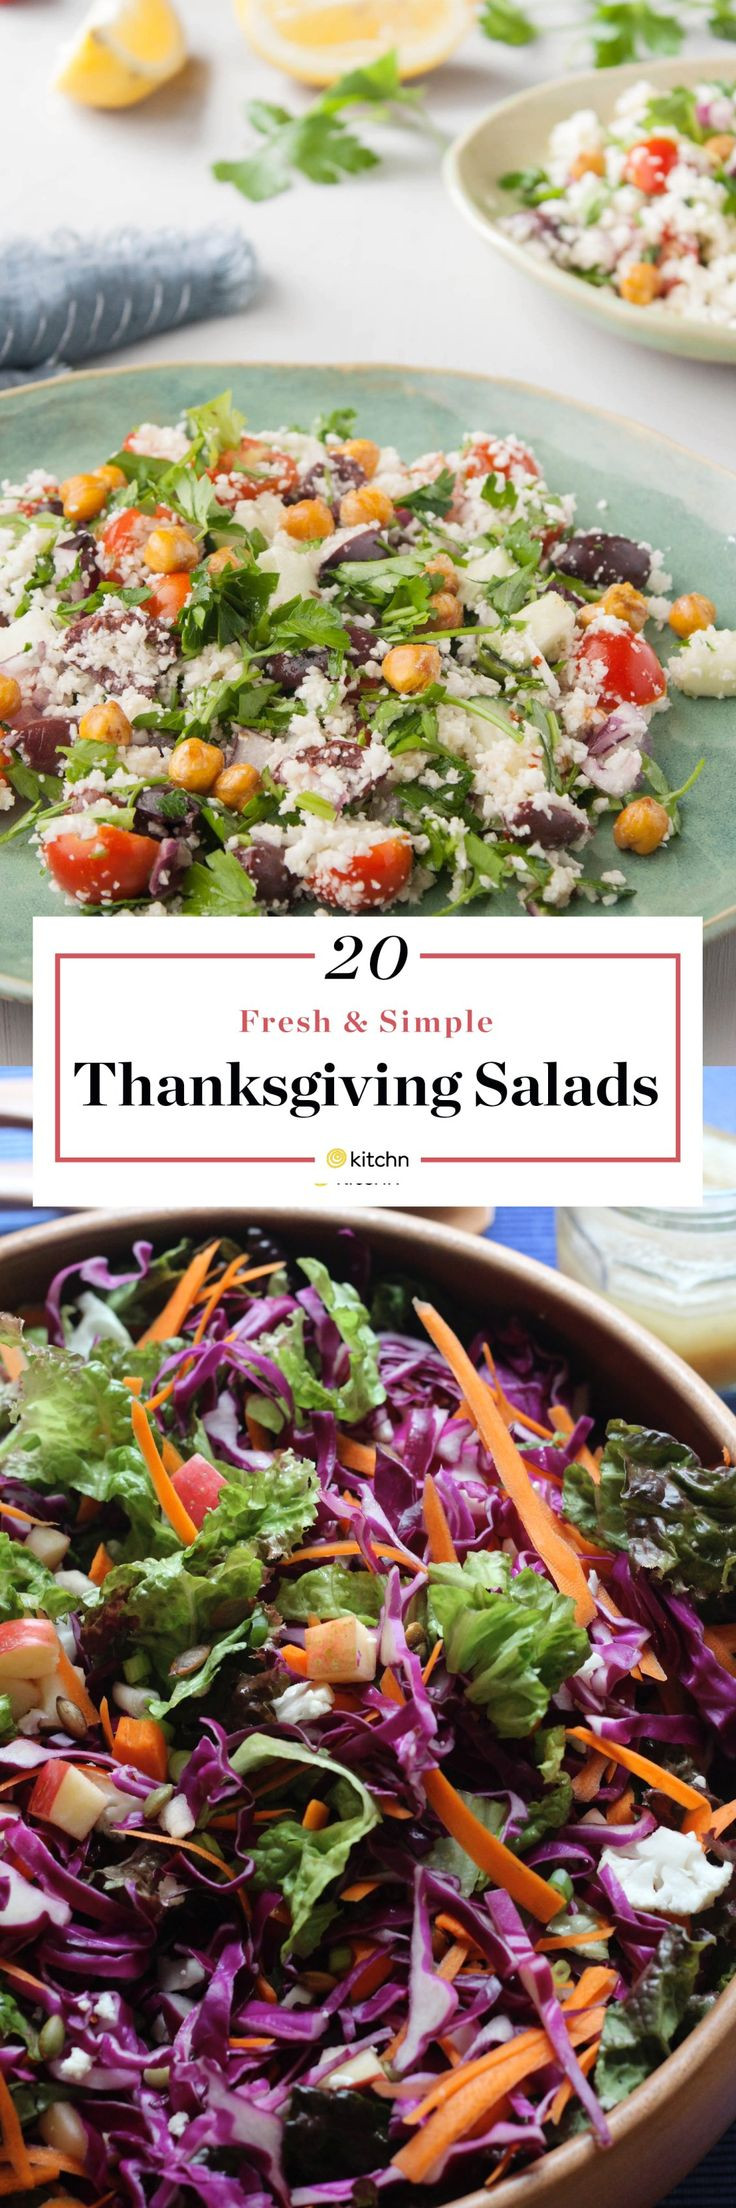 Cold Salads For Thanksgiving
 Best 25 Cold dishes ideas on Pinterest